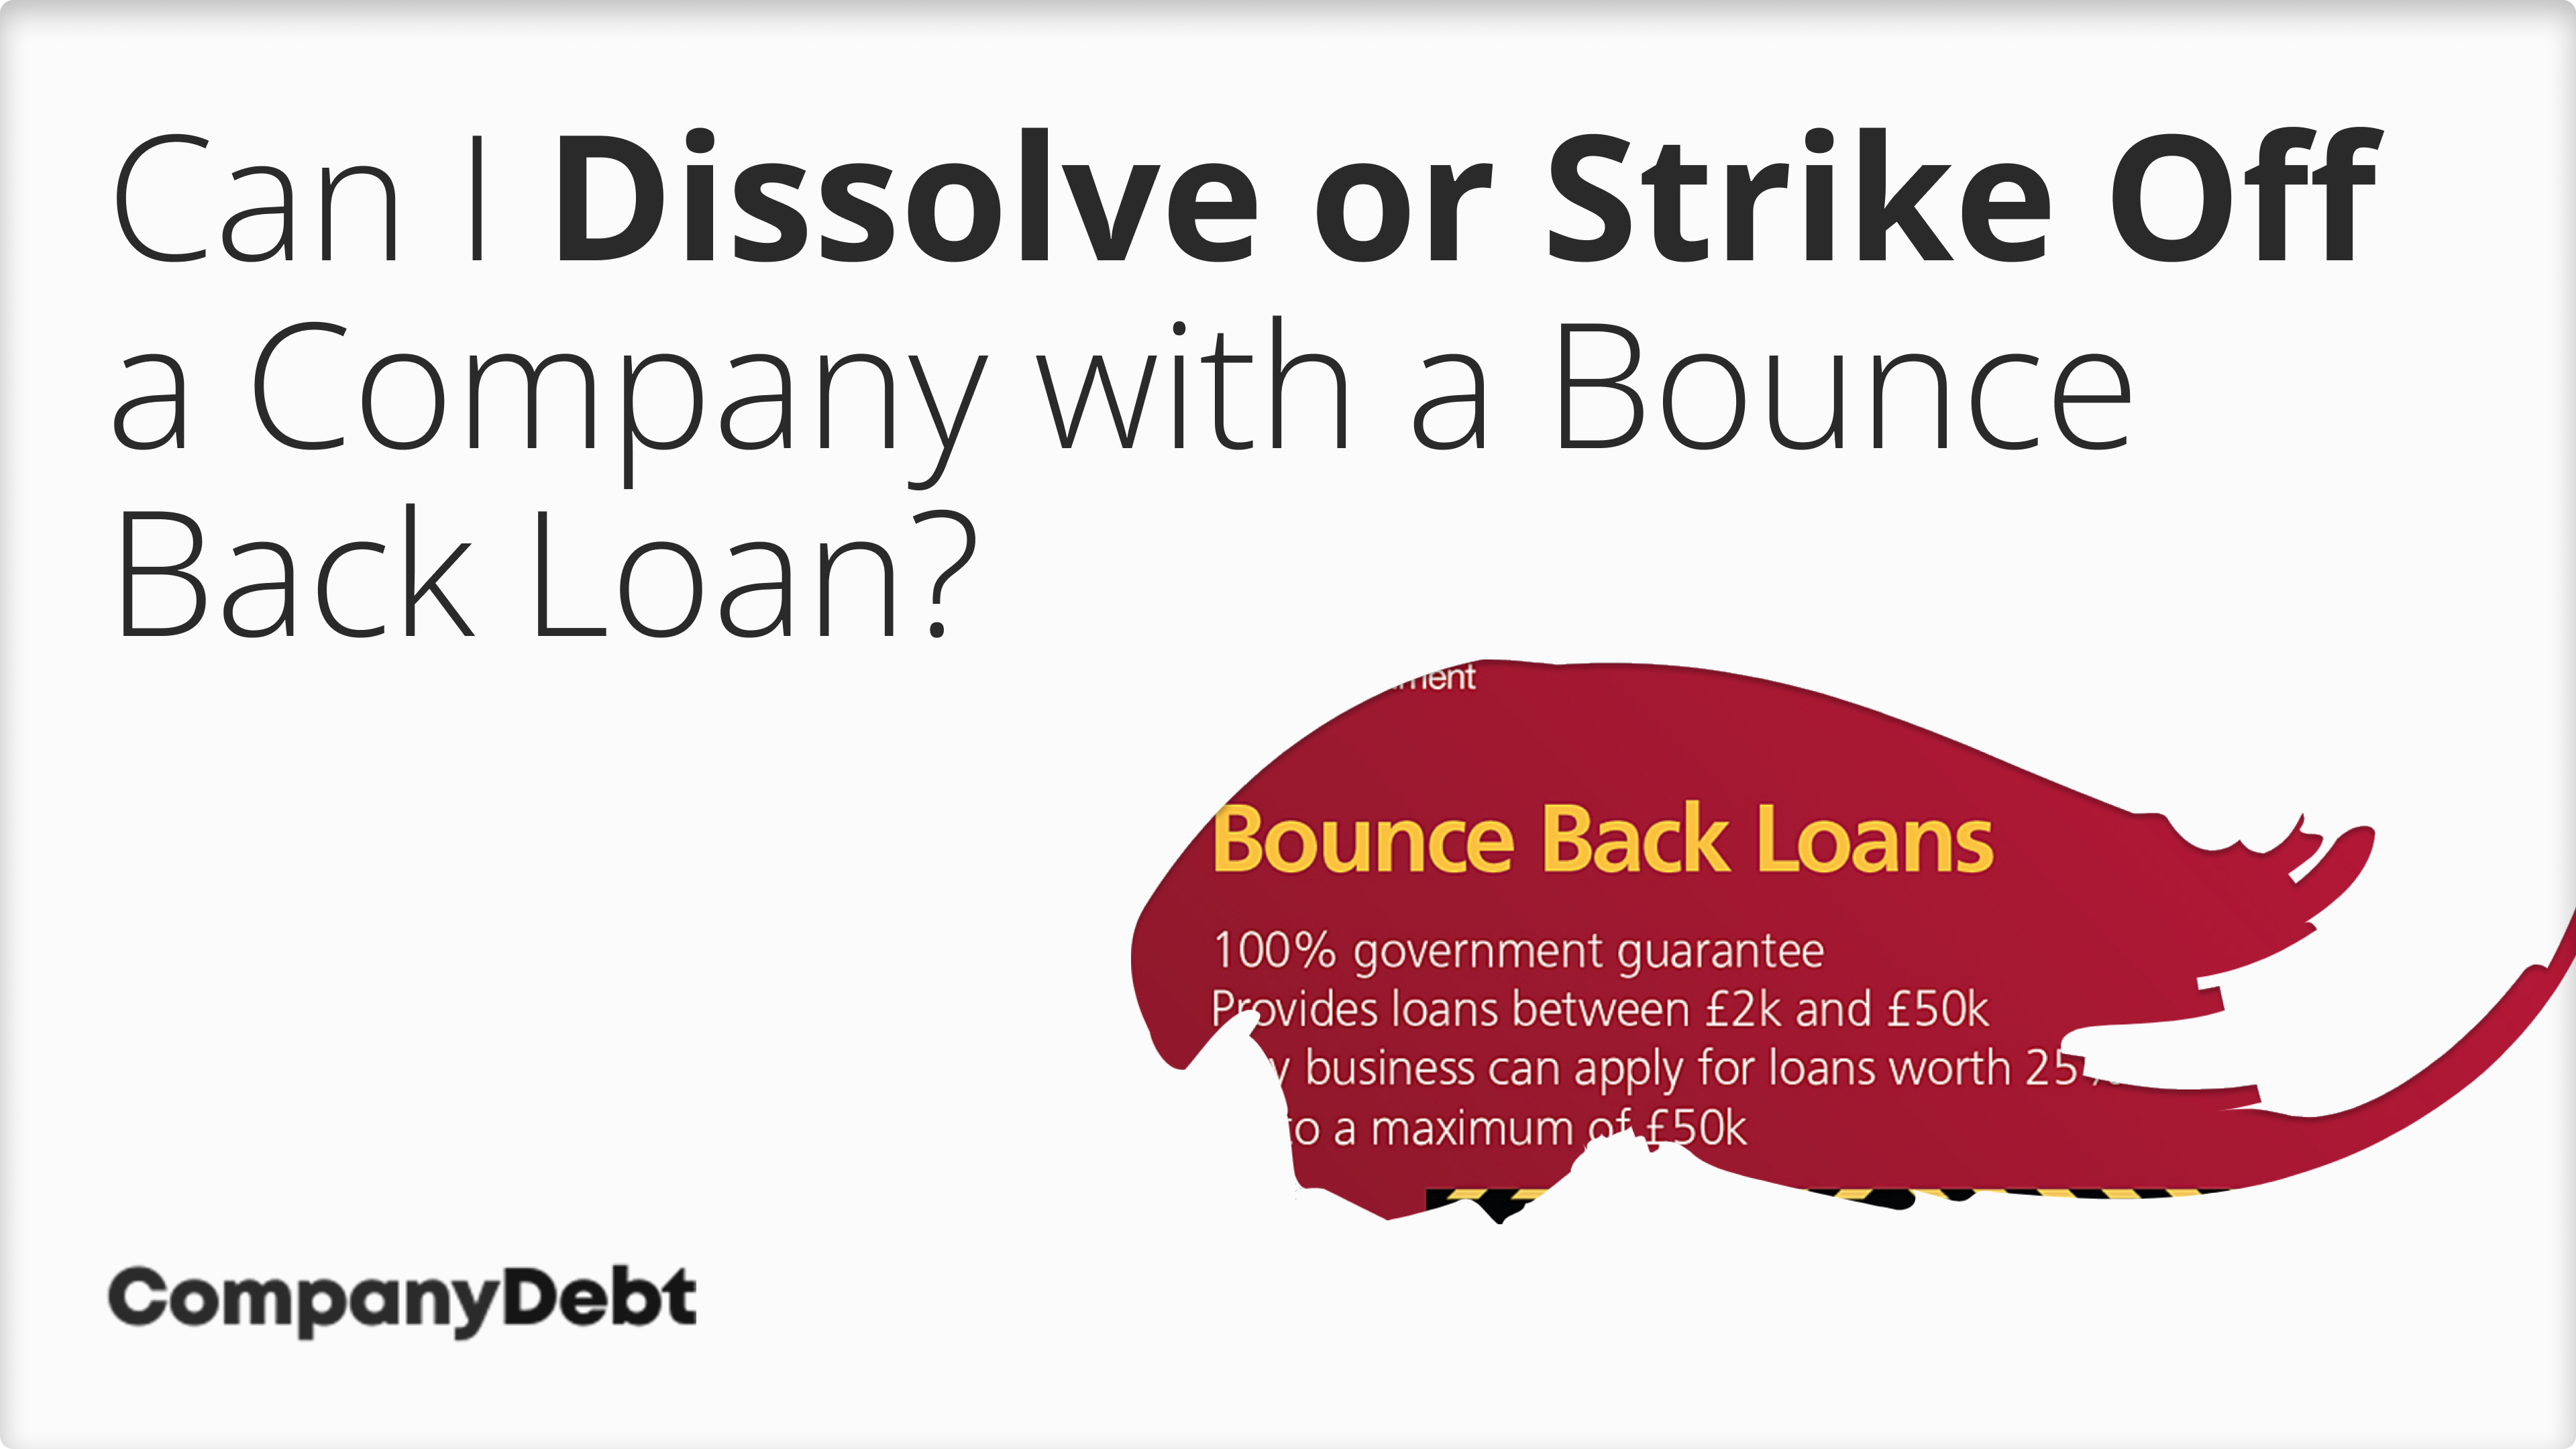 Can-I-Dissolve-or-Strike-Off-a-Company-with-a-Bounce-Back-Loan_